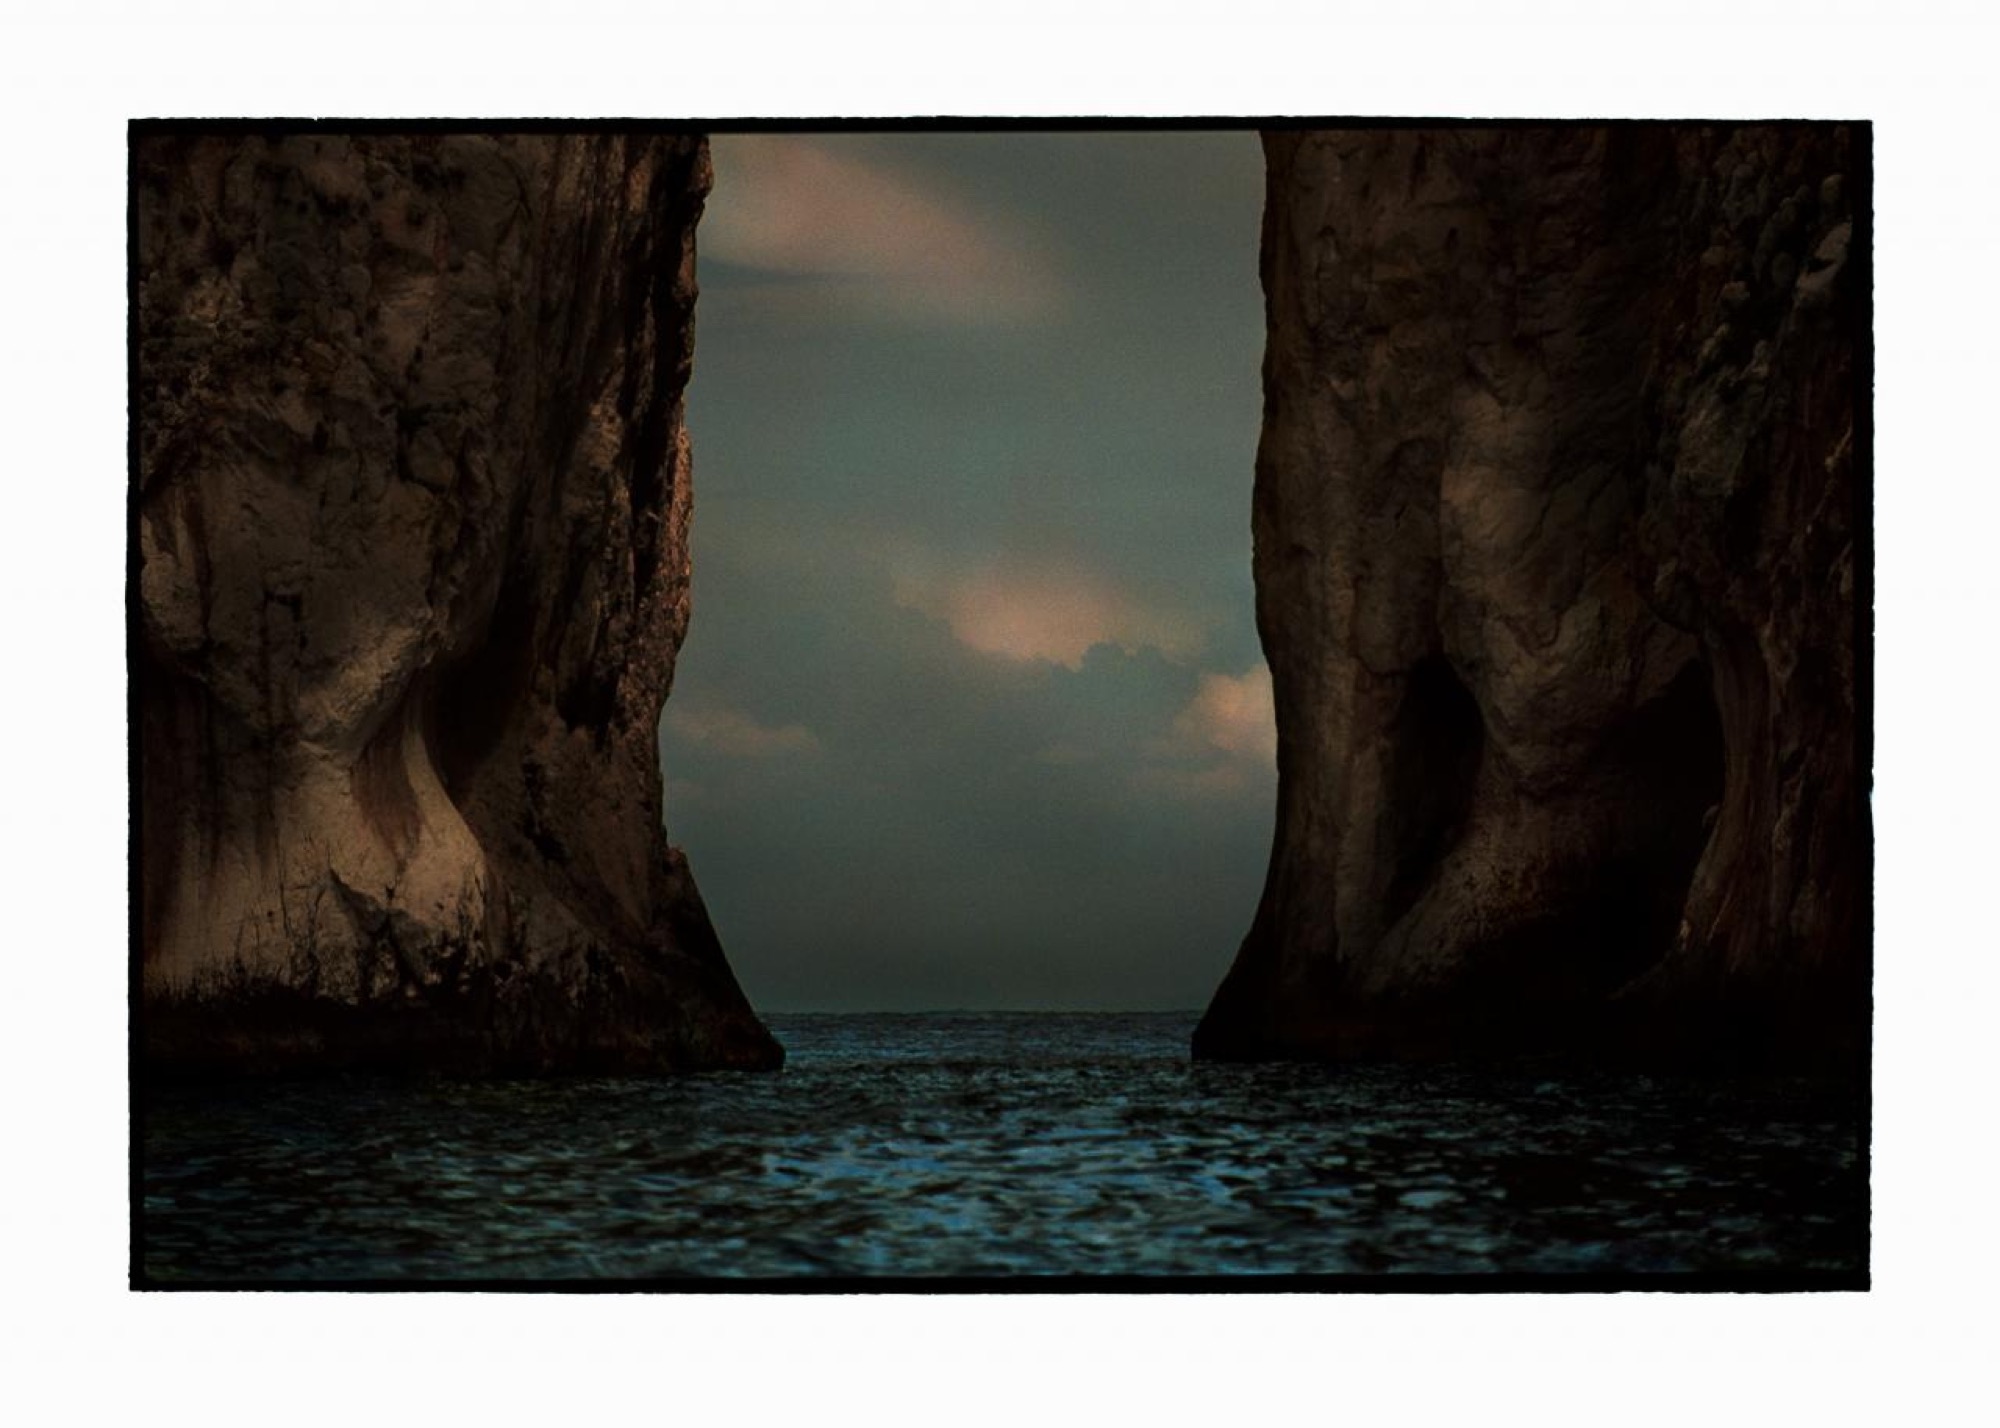 Bill Henson, <em>Untitled</em>, inkjet print, 127.0 x 180.0 cm, ed. 5/5, National Gallery of Victoria, Melbourne, Gift of William Donald Bowness through the Australian, Government’s Cultural Gifts Program, 2016.